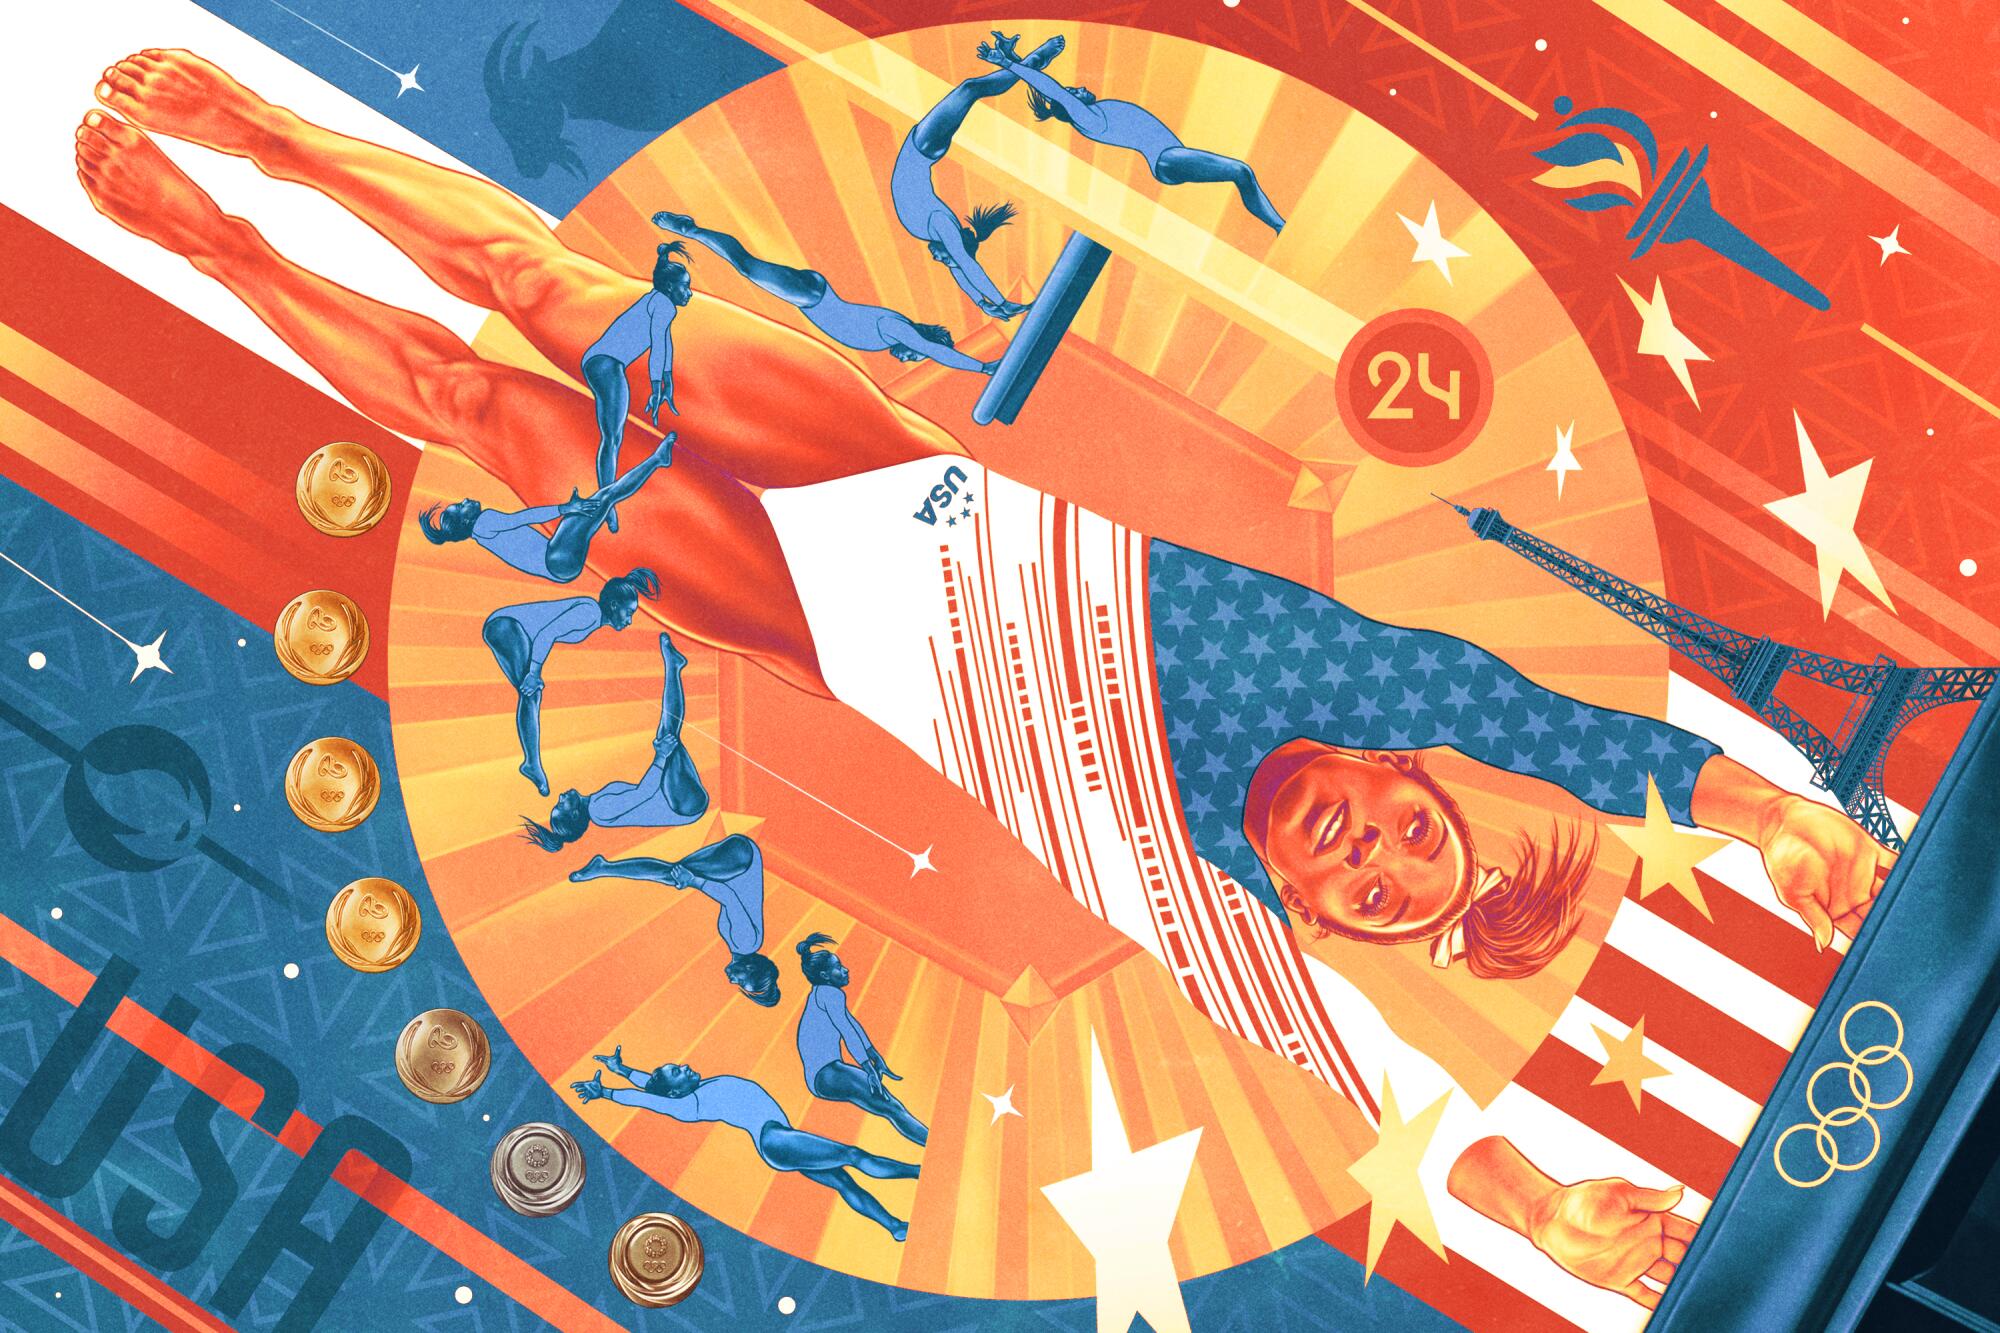 Illustration of gymnast Simone Biles, who will be competing at the 2024 Olympic Summer Games in Paris.